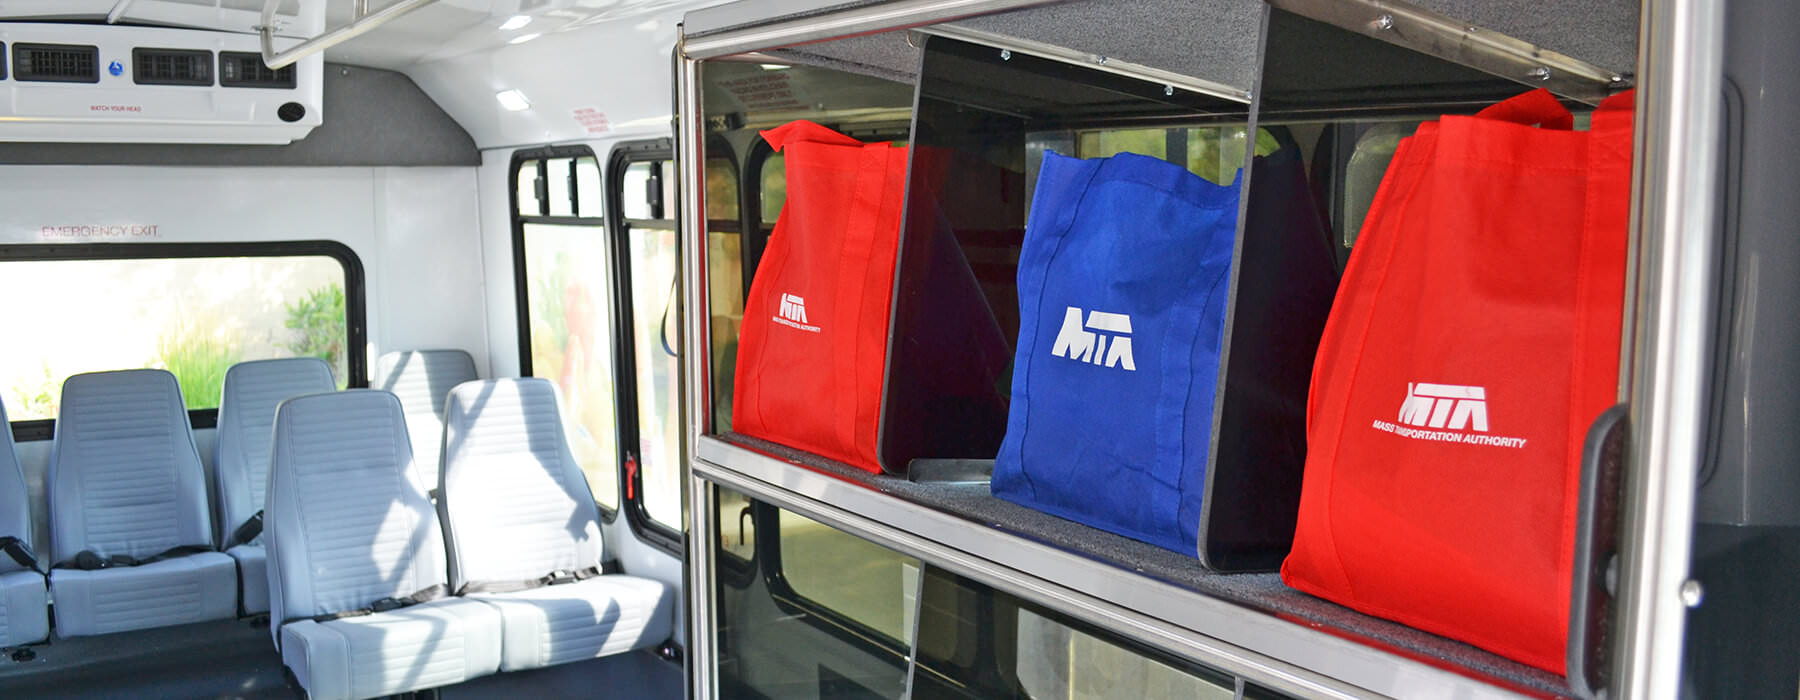 Ride to Groceries bus showing bins to hold grocery bags while traveling.